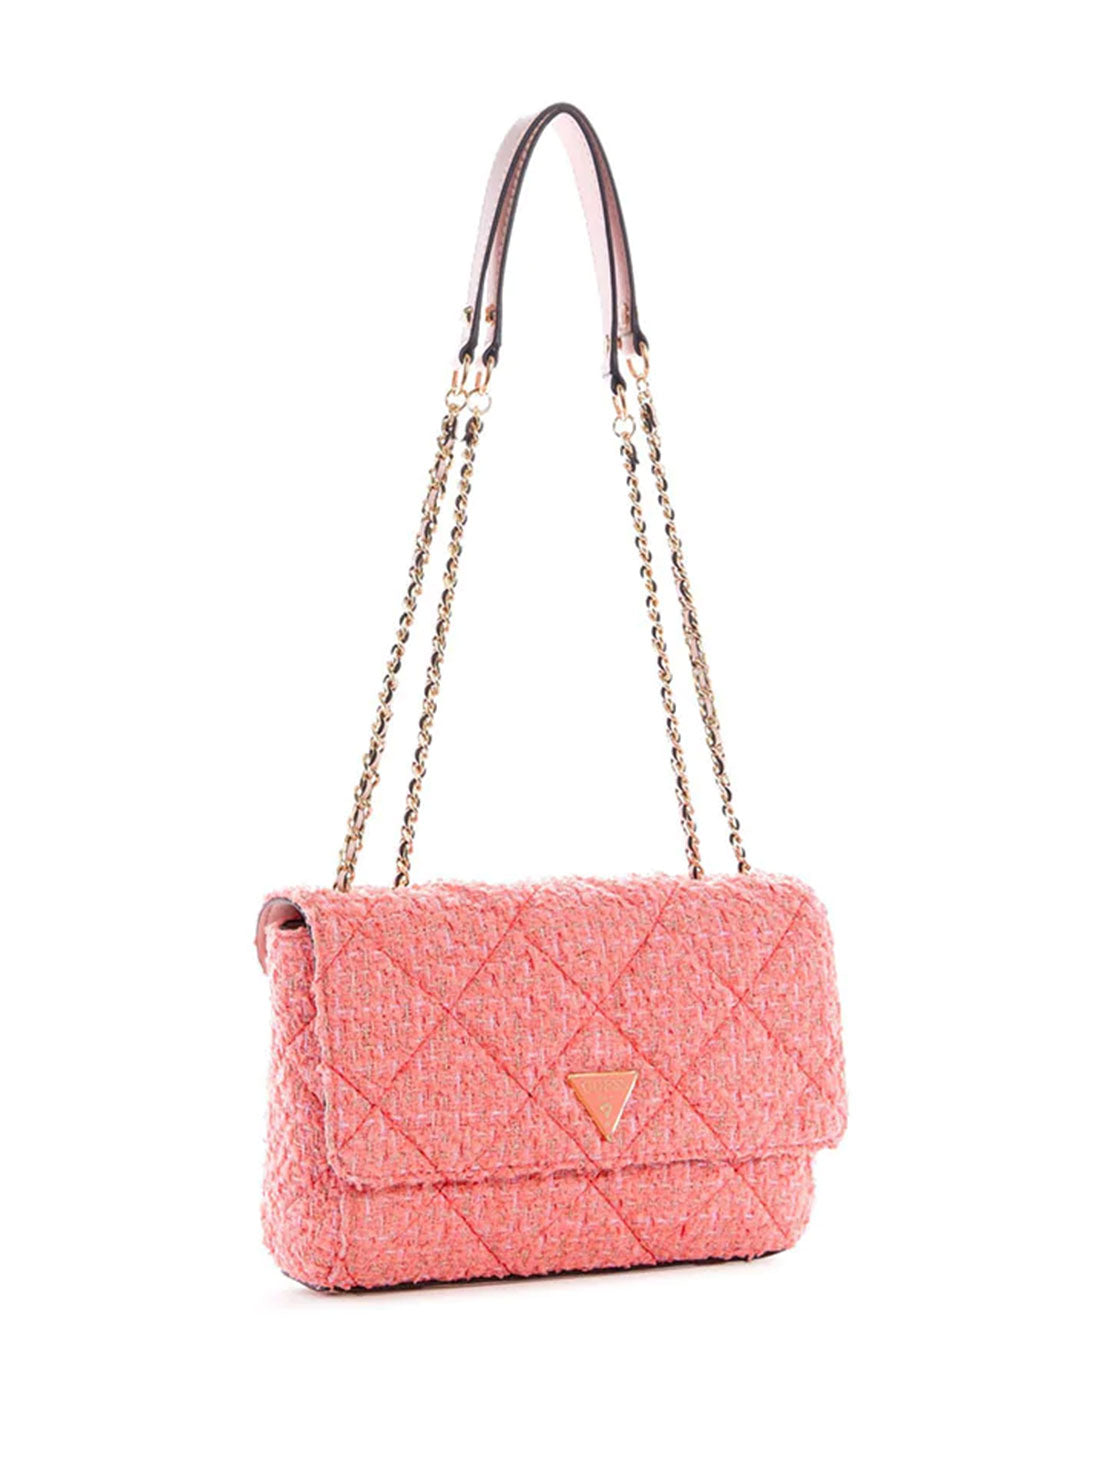 GUESS Womens Coral Pink Tweed Cessily Convertible Crossbody Bag TC767921 Side View